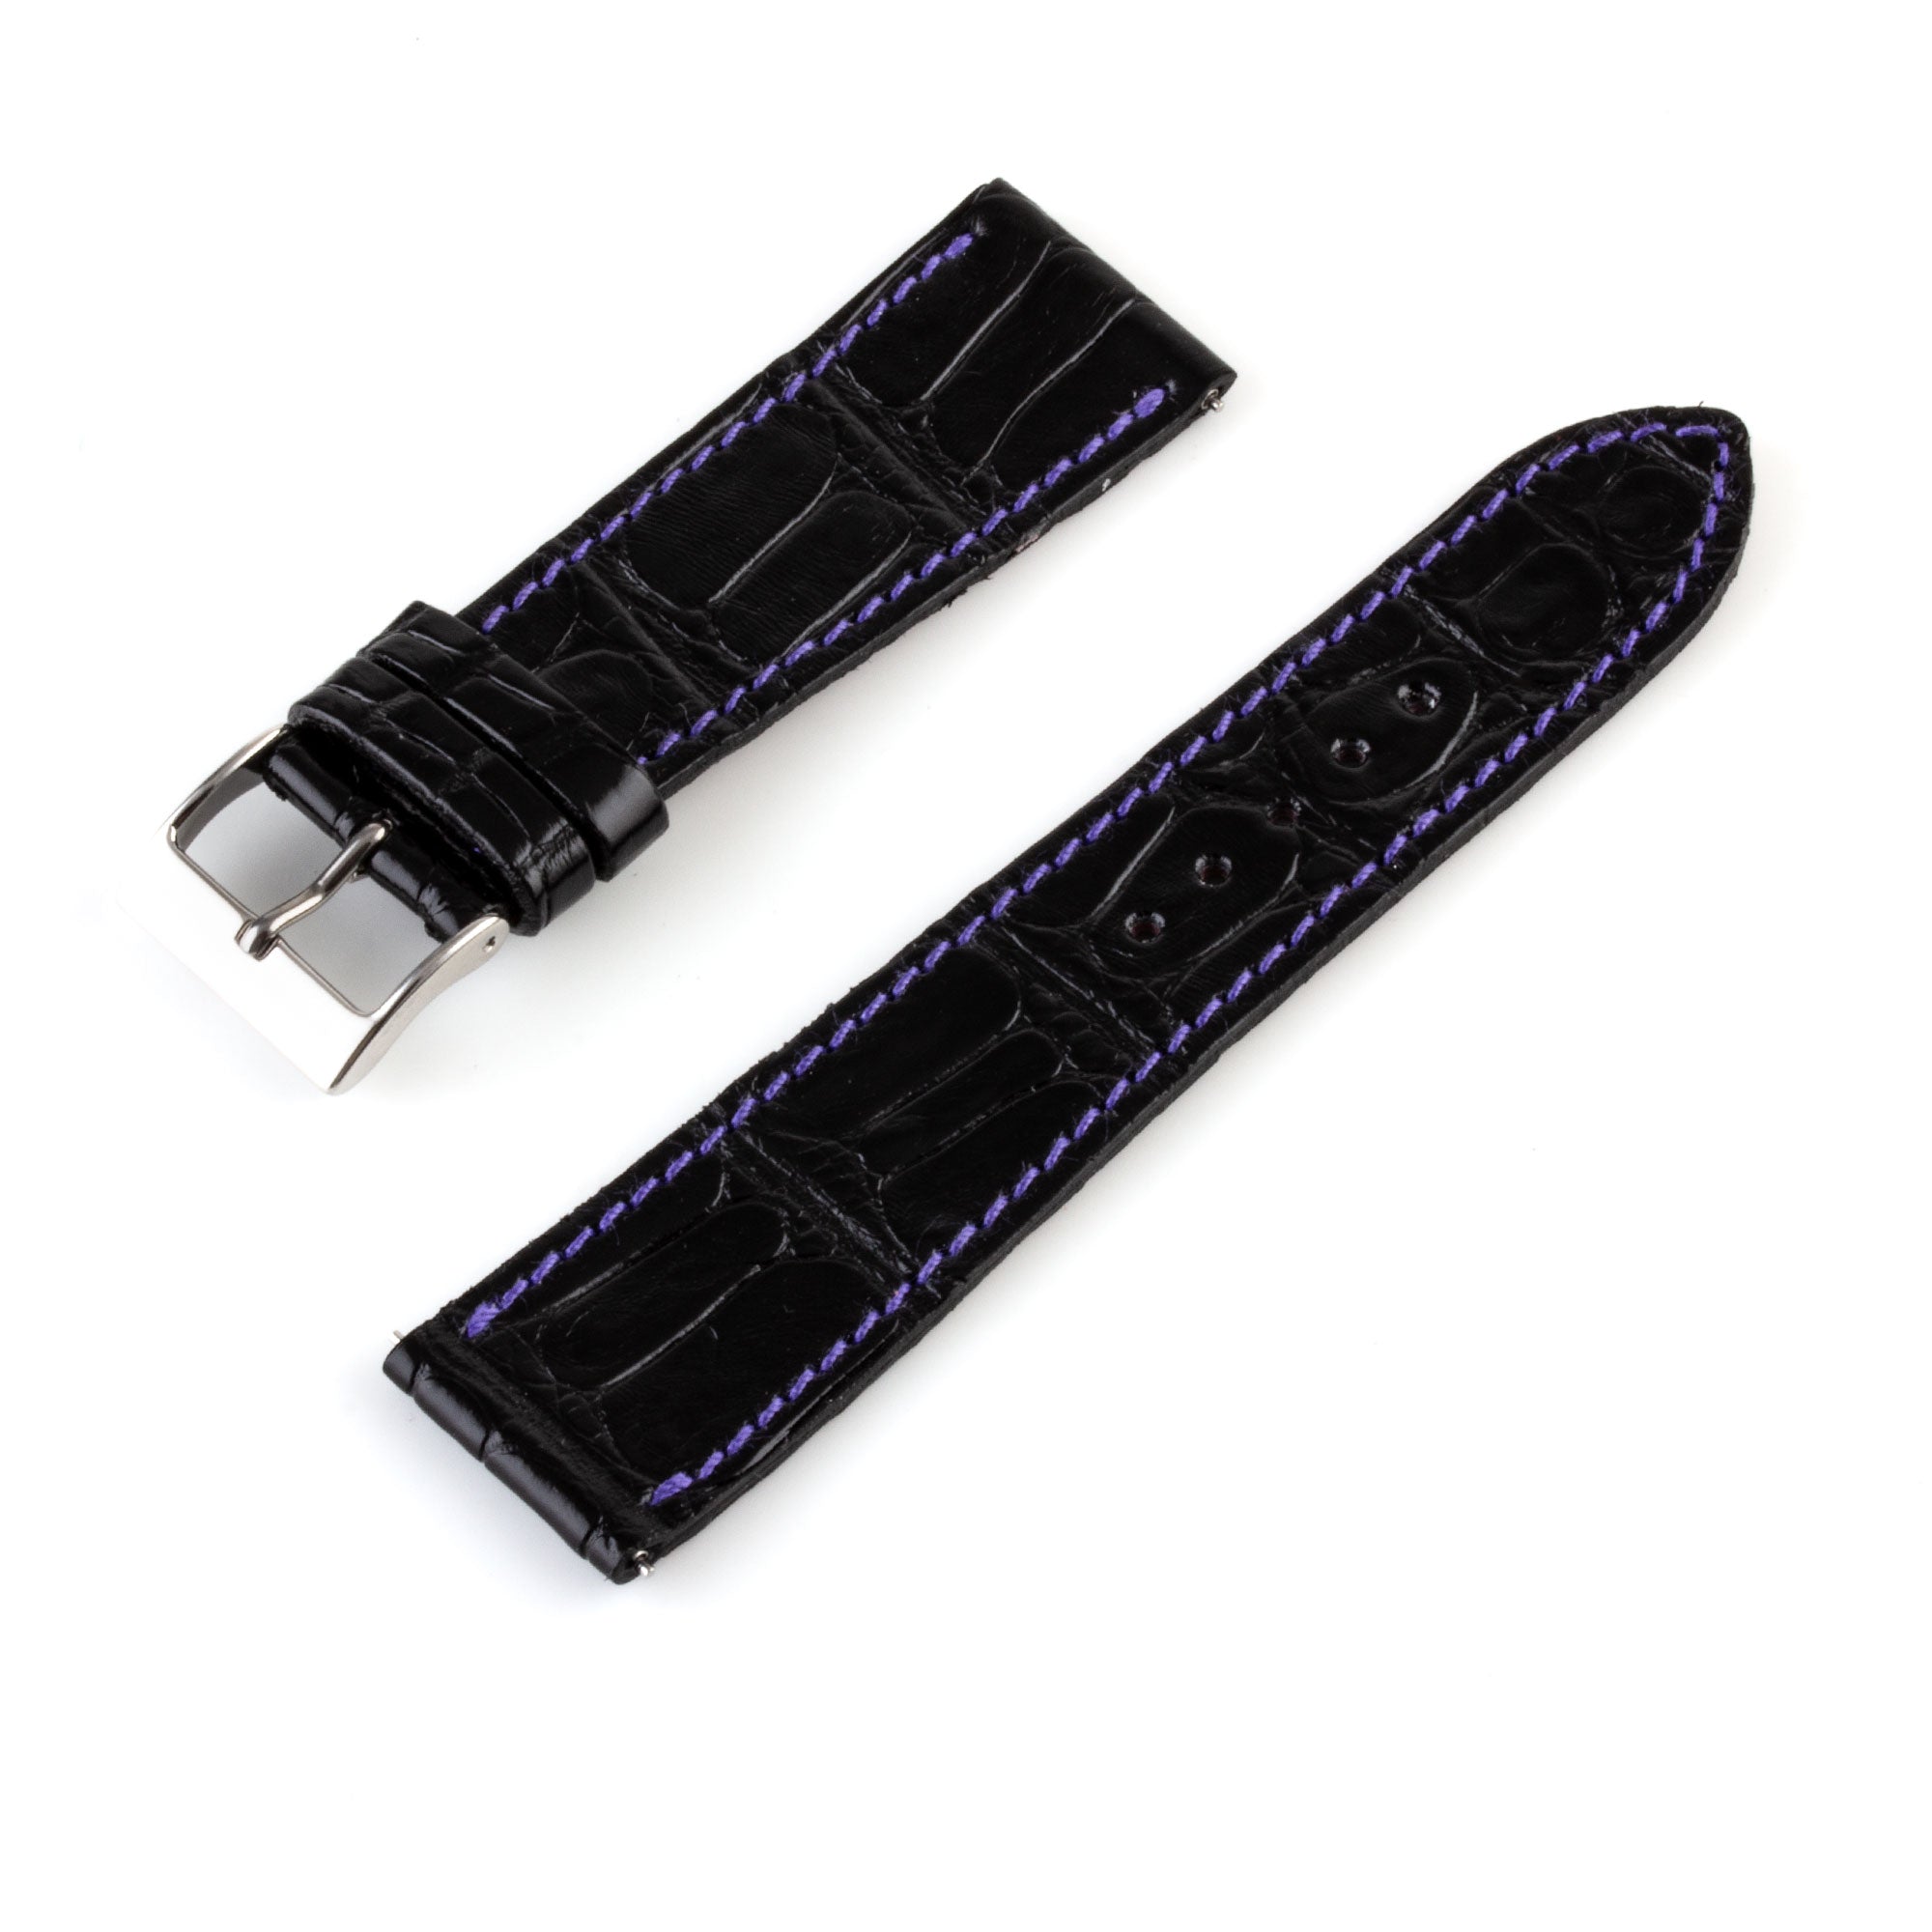 Alligator "Solo" leather watch band - 21mm width (0.83 inches) / Size M (n° 2)